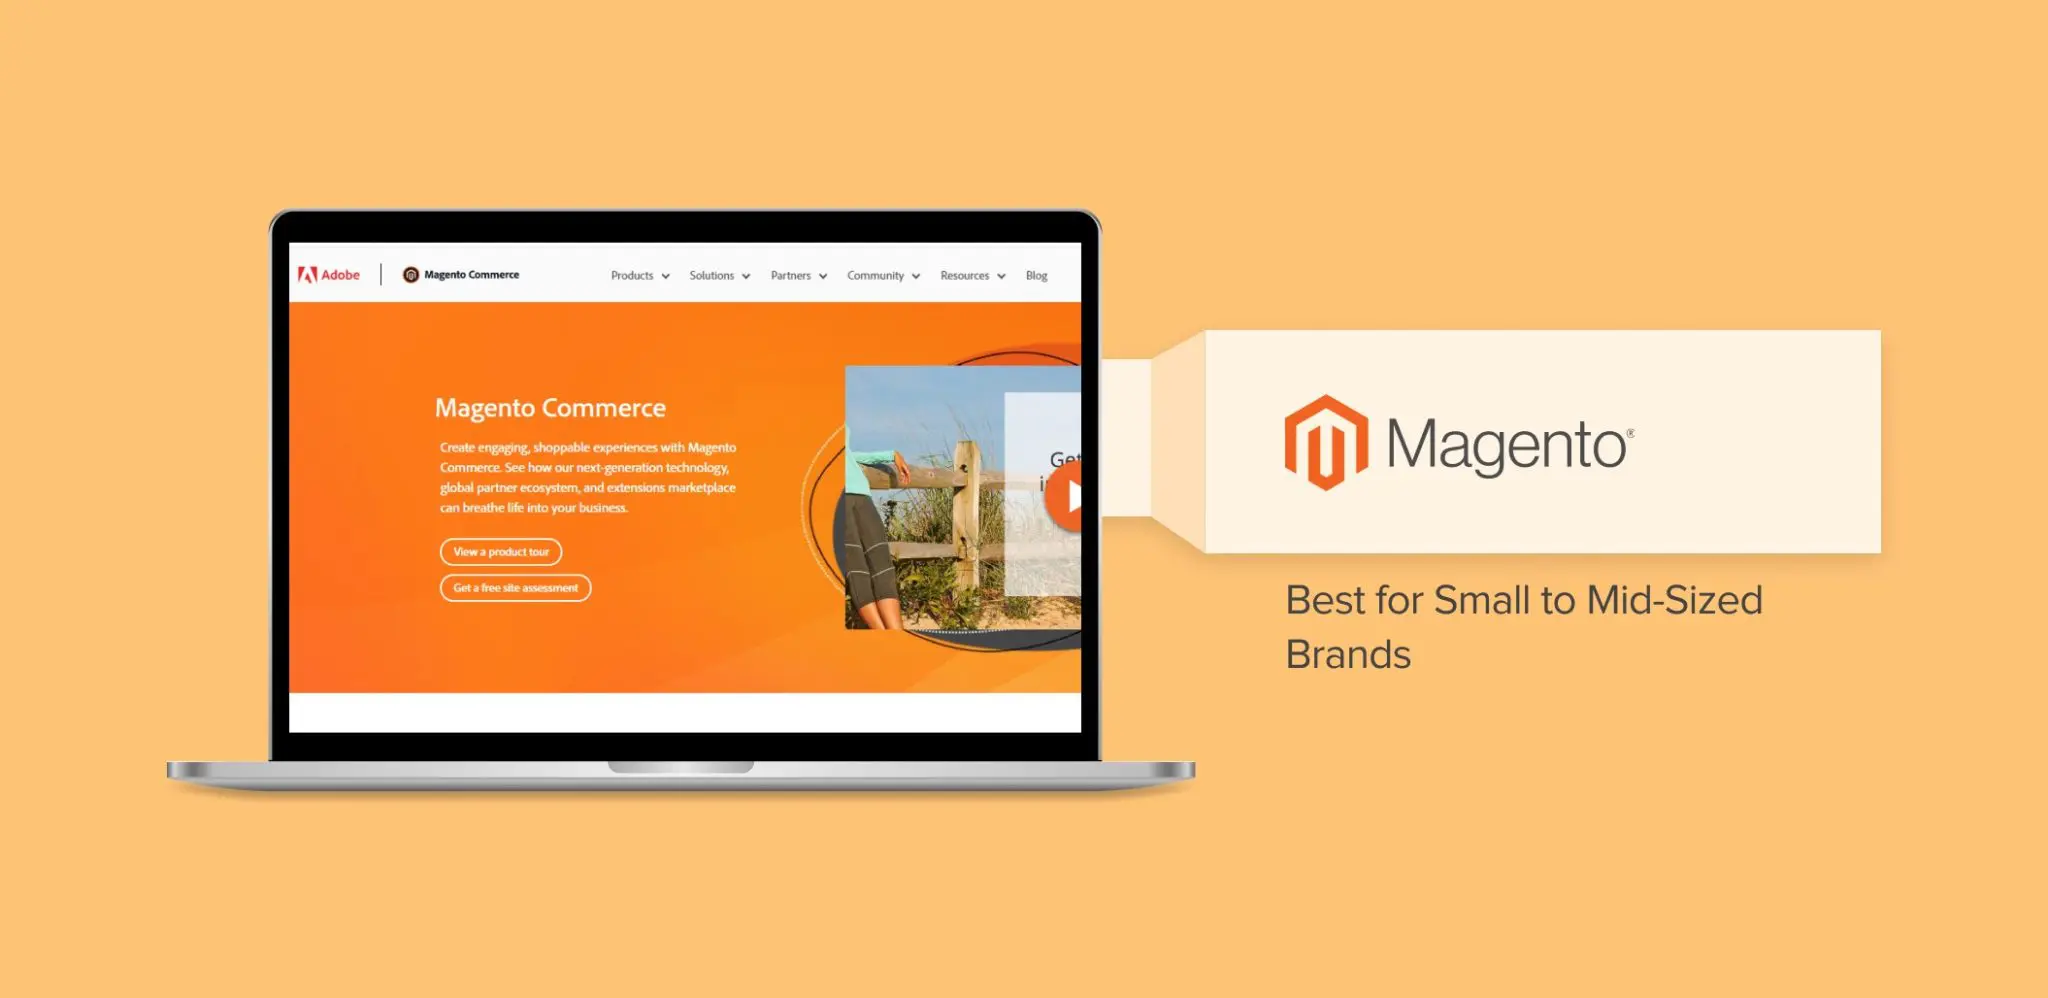 Magento - Best for Small to Mid-Sized Brands